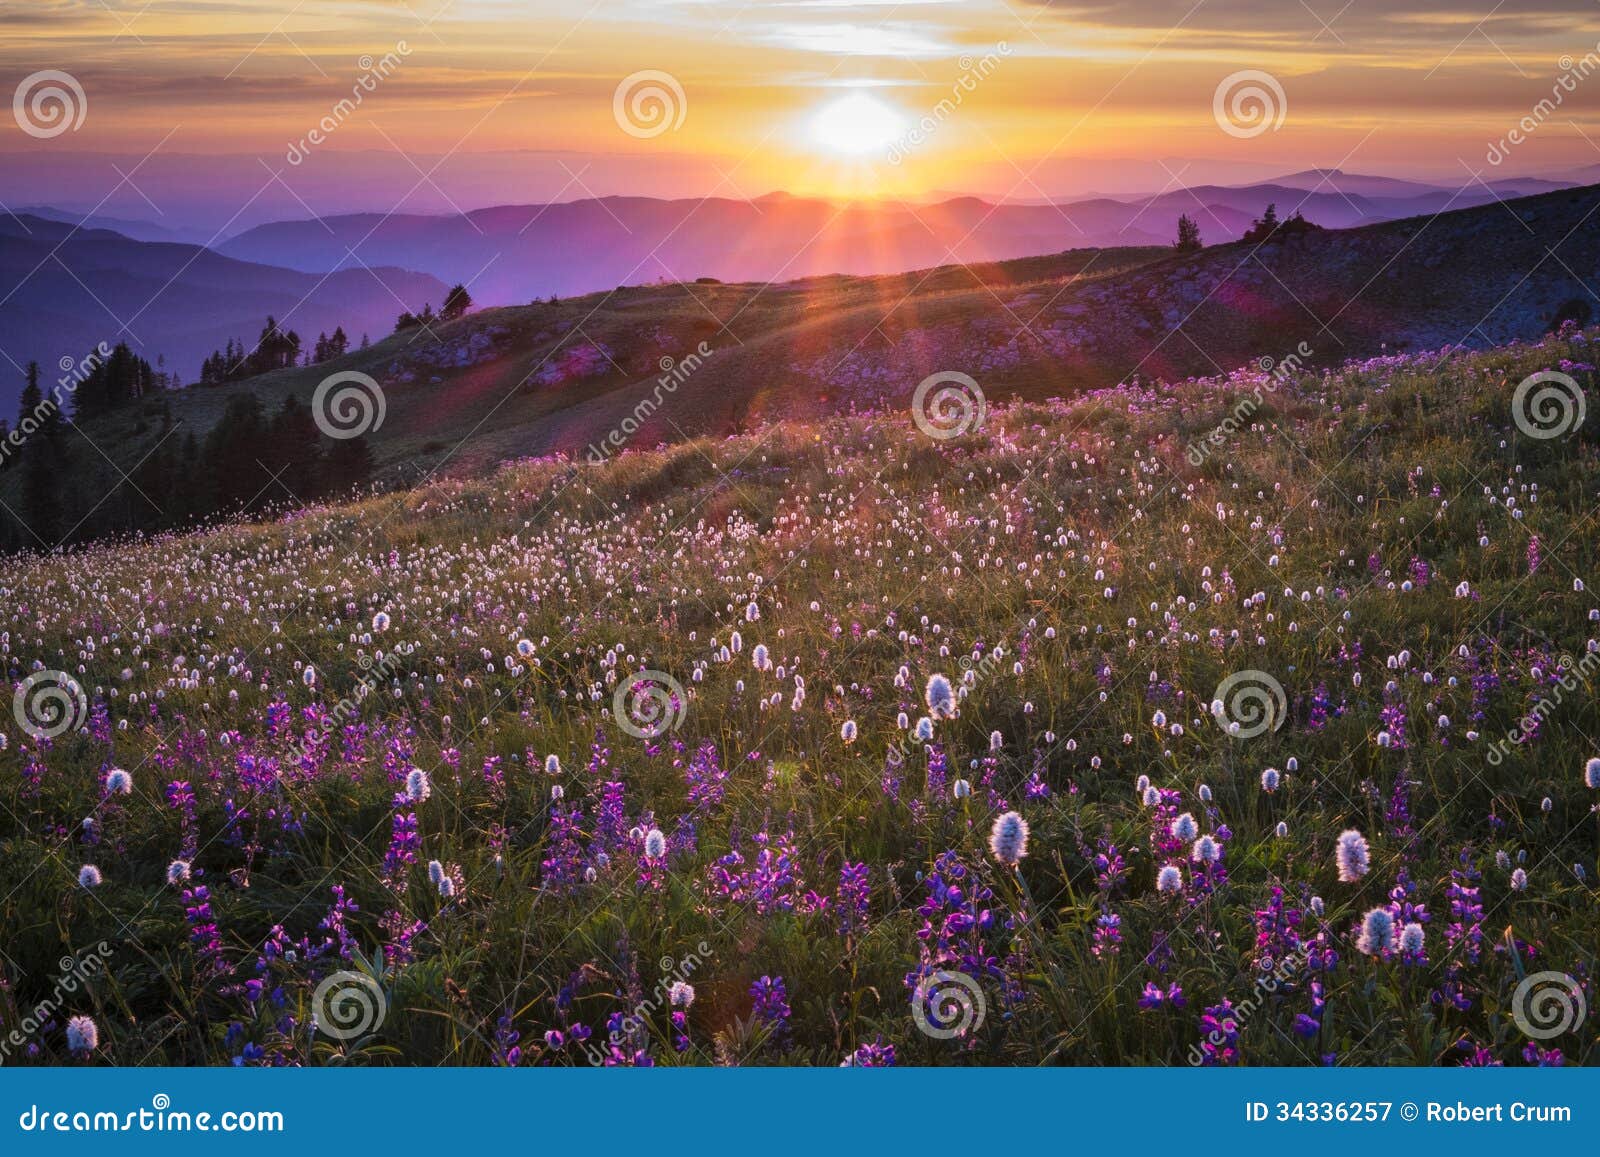 mountain wildflowers backlit by sunset